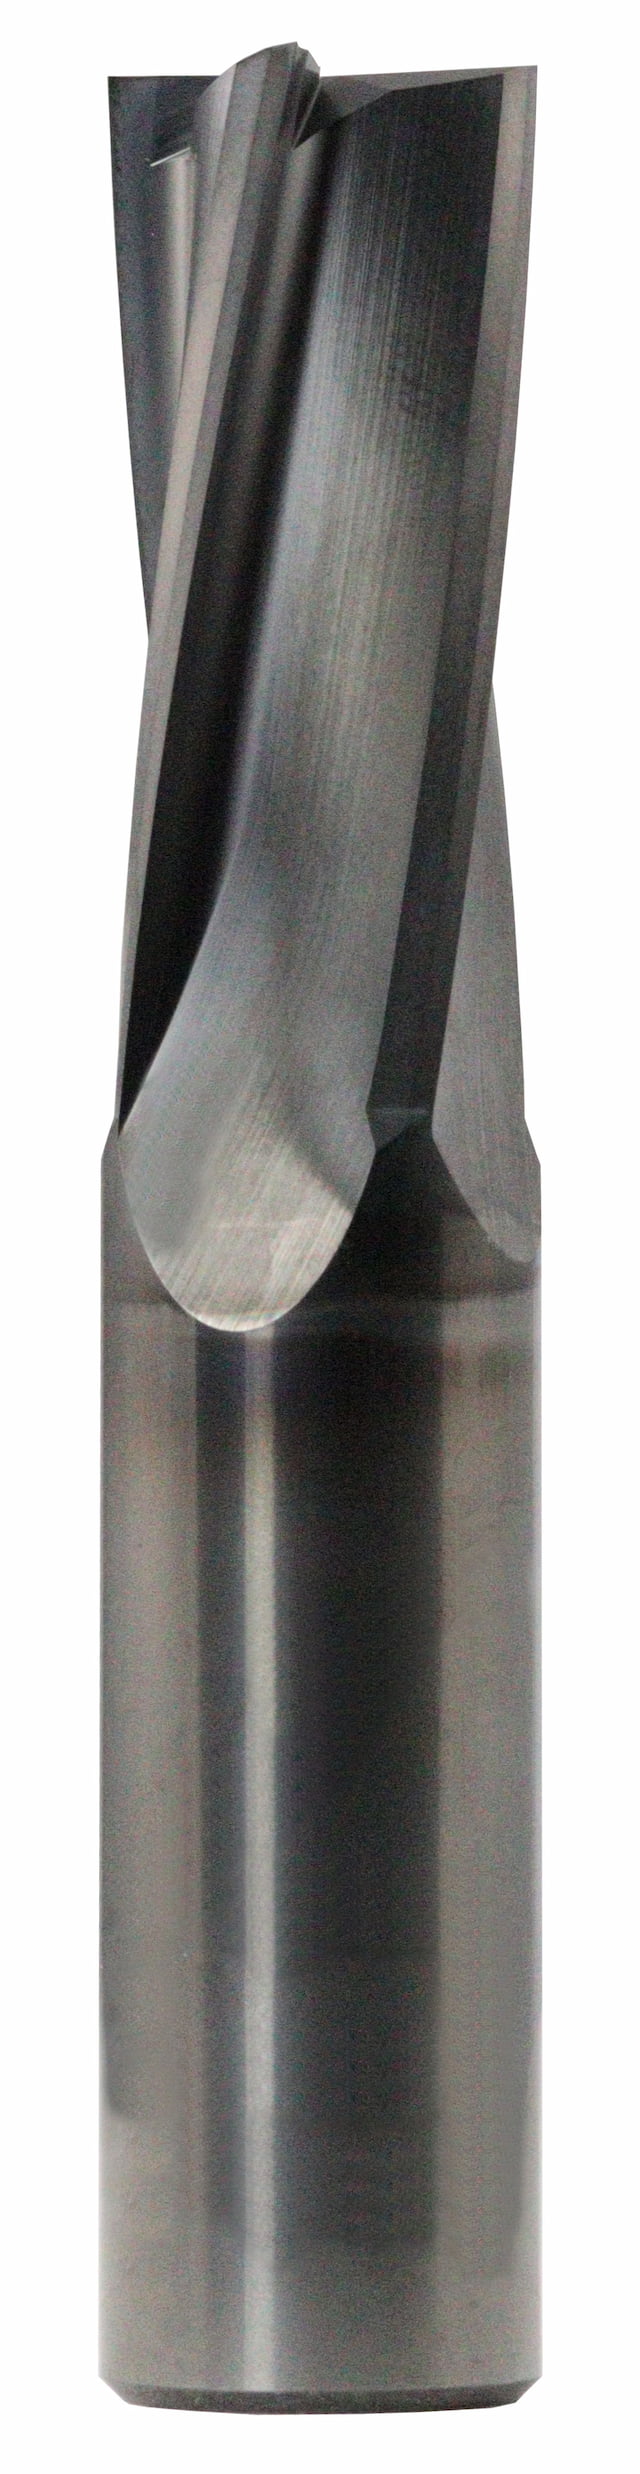 1/4" Dia, 4 Flute, Square End End Mill - 72979